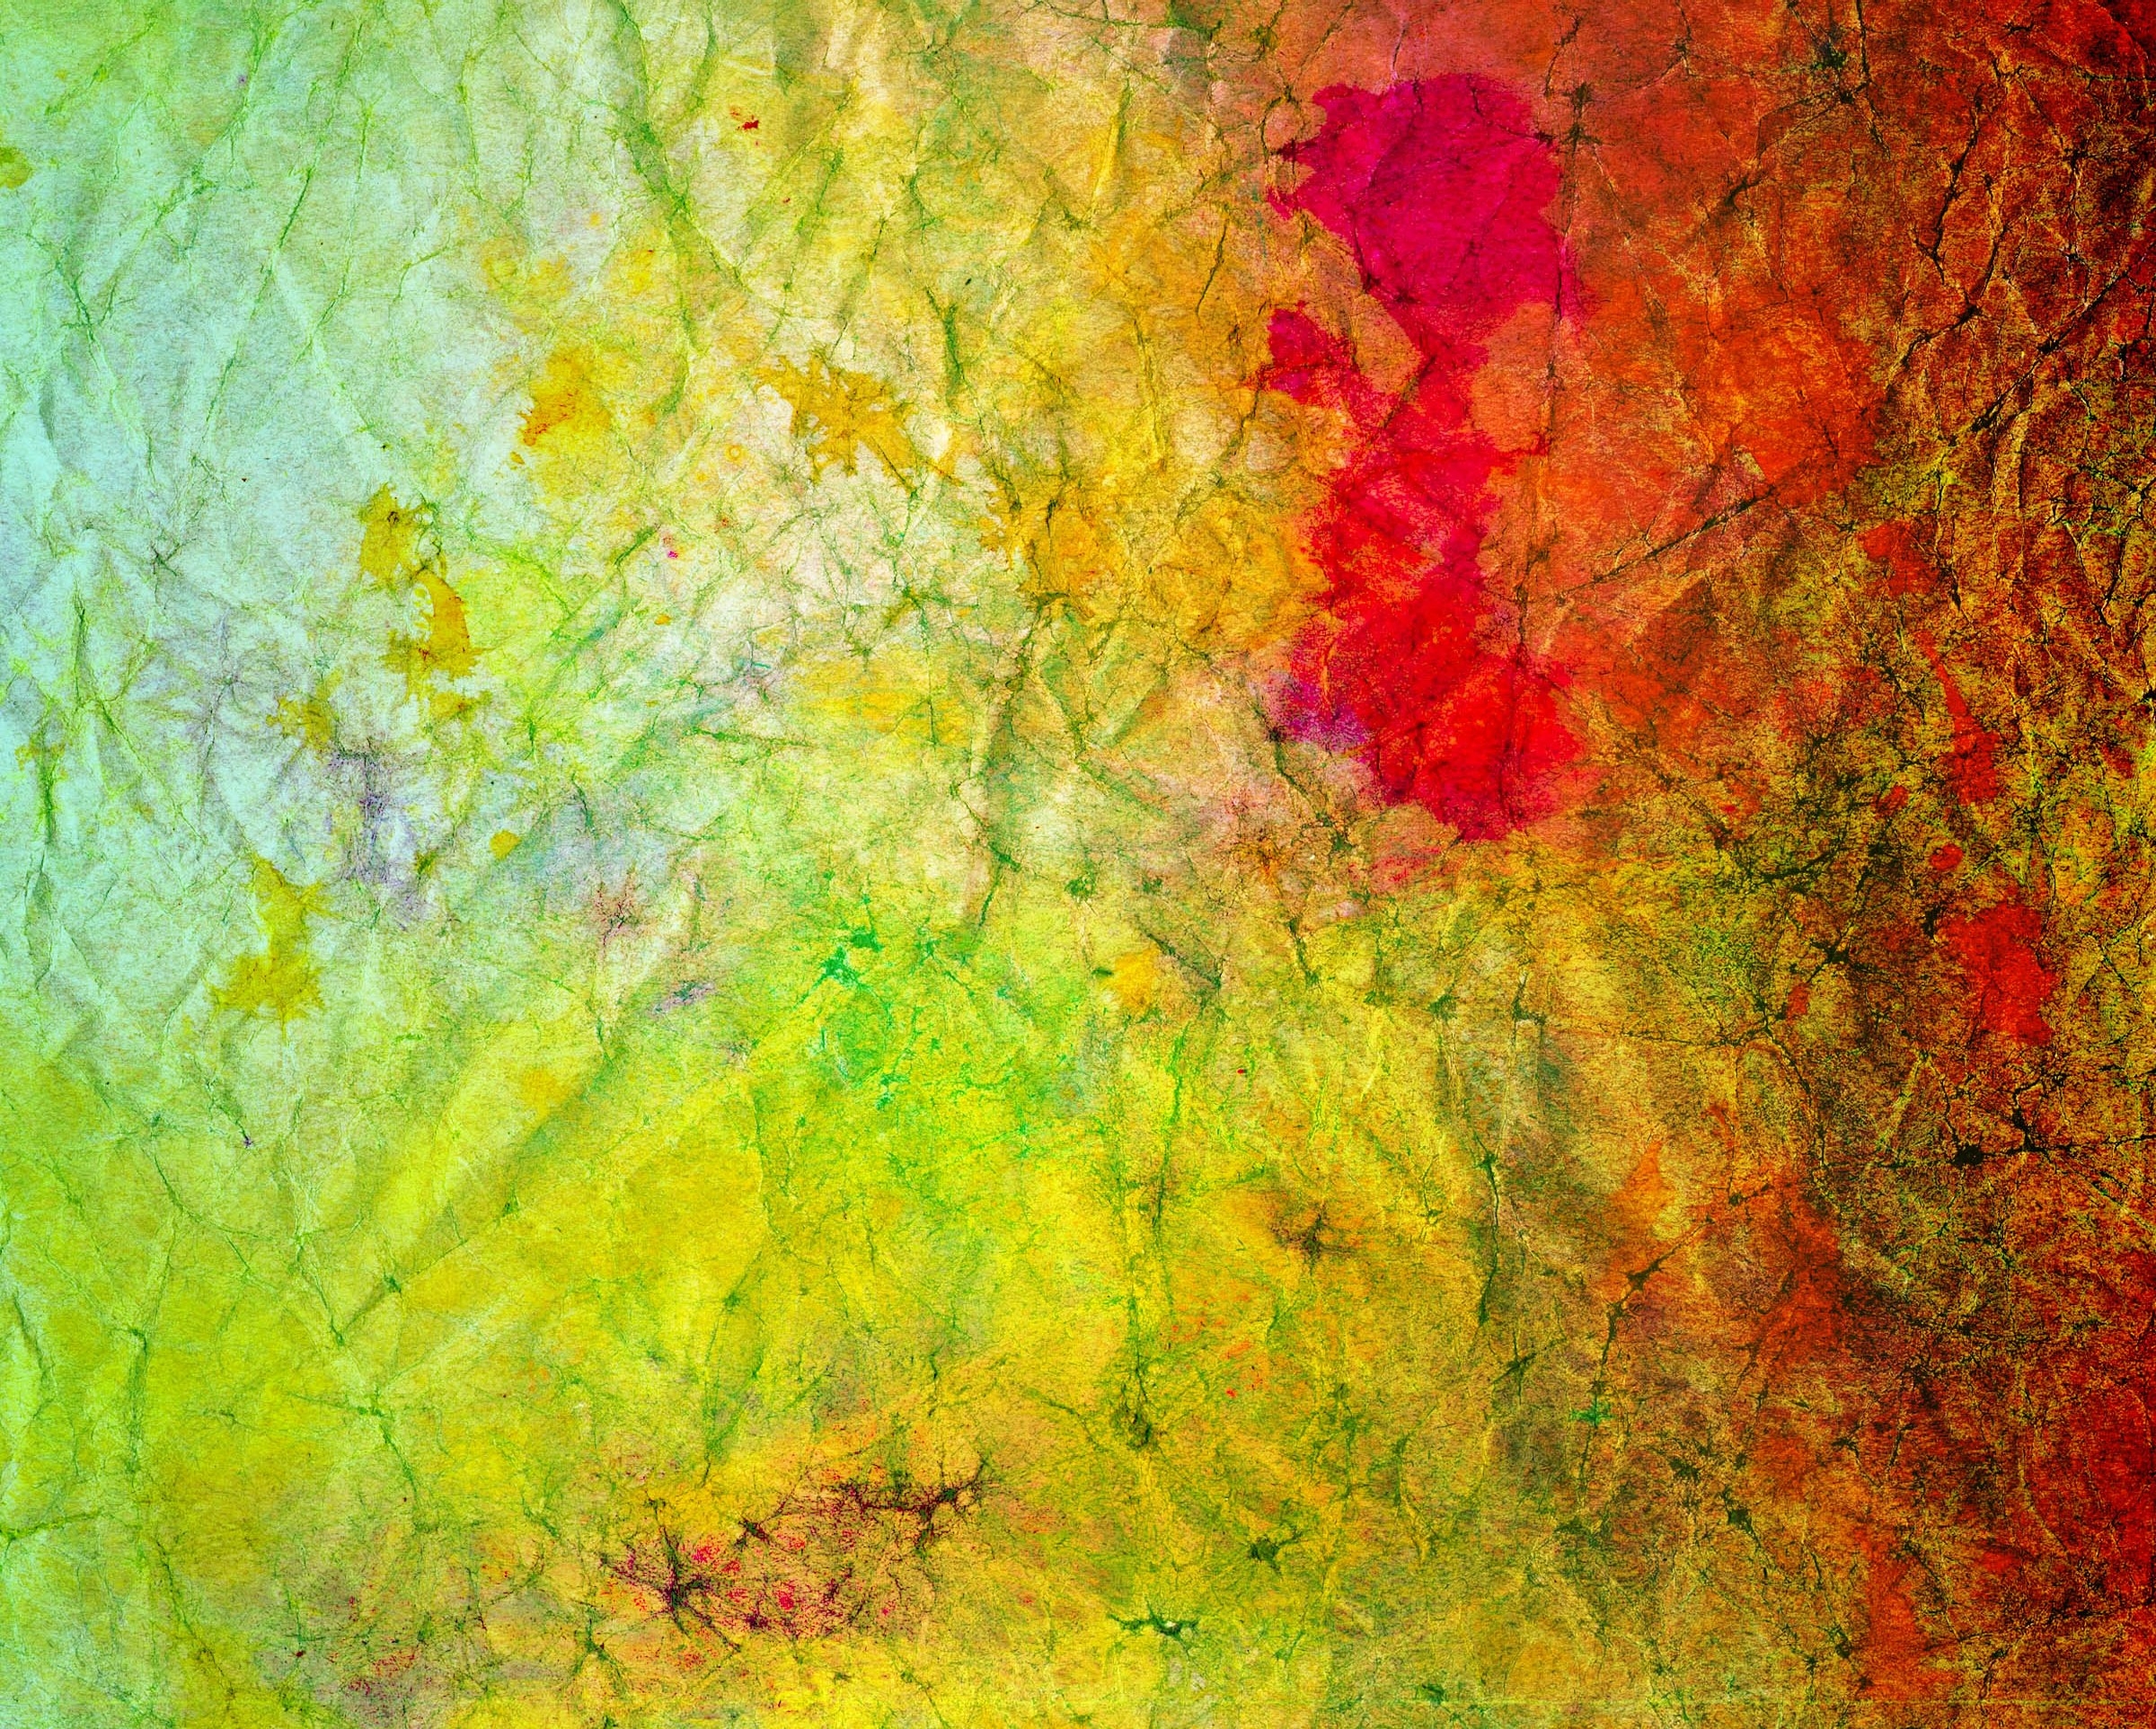 motley, multicolored, textures, background, spotted, spotty, texture Phone Background